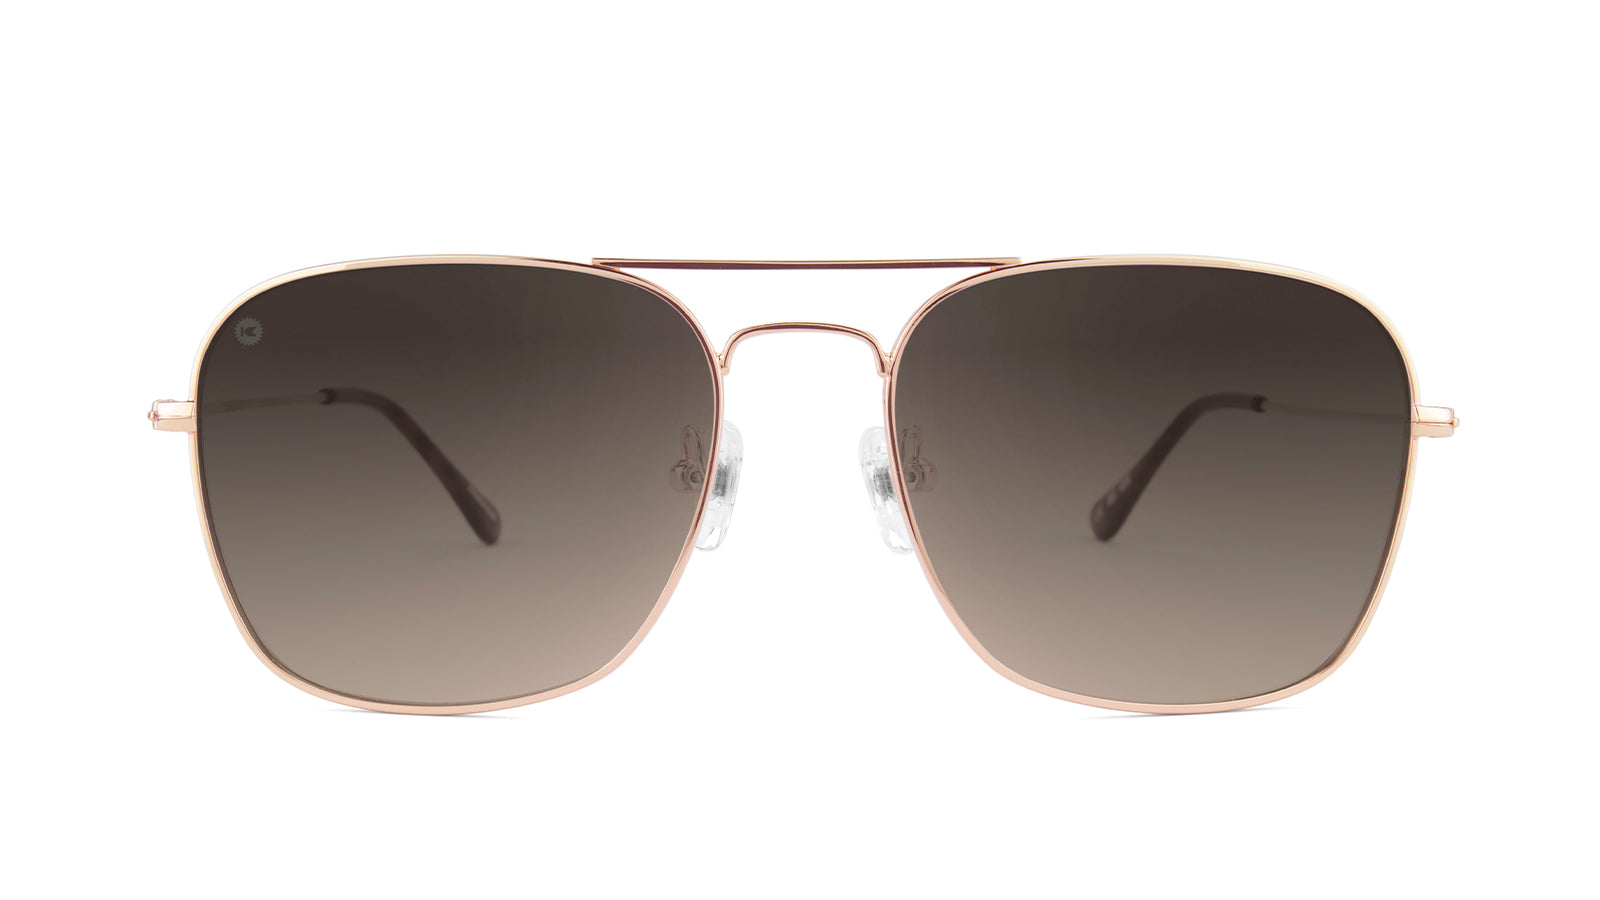 RAY-BAN New Attractive Black & Gold 3136 Square Aviator Style Sunglass –  Sunglass Deal